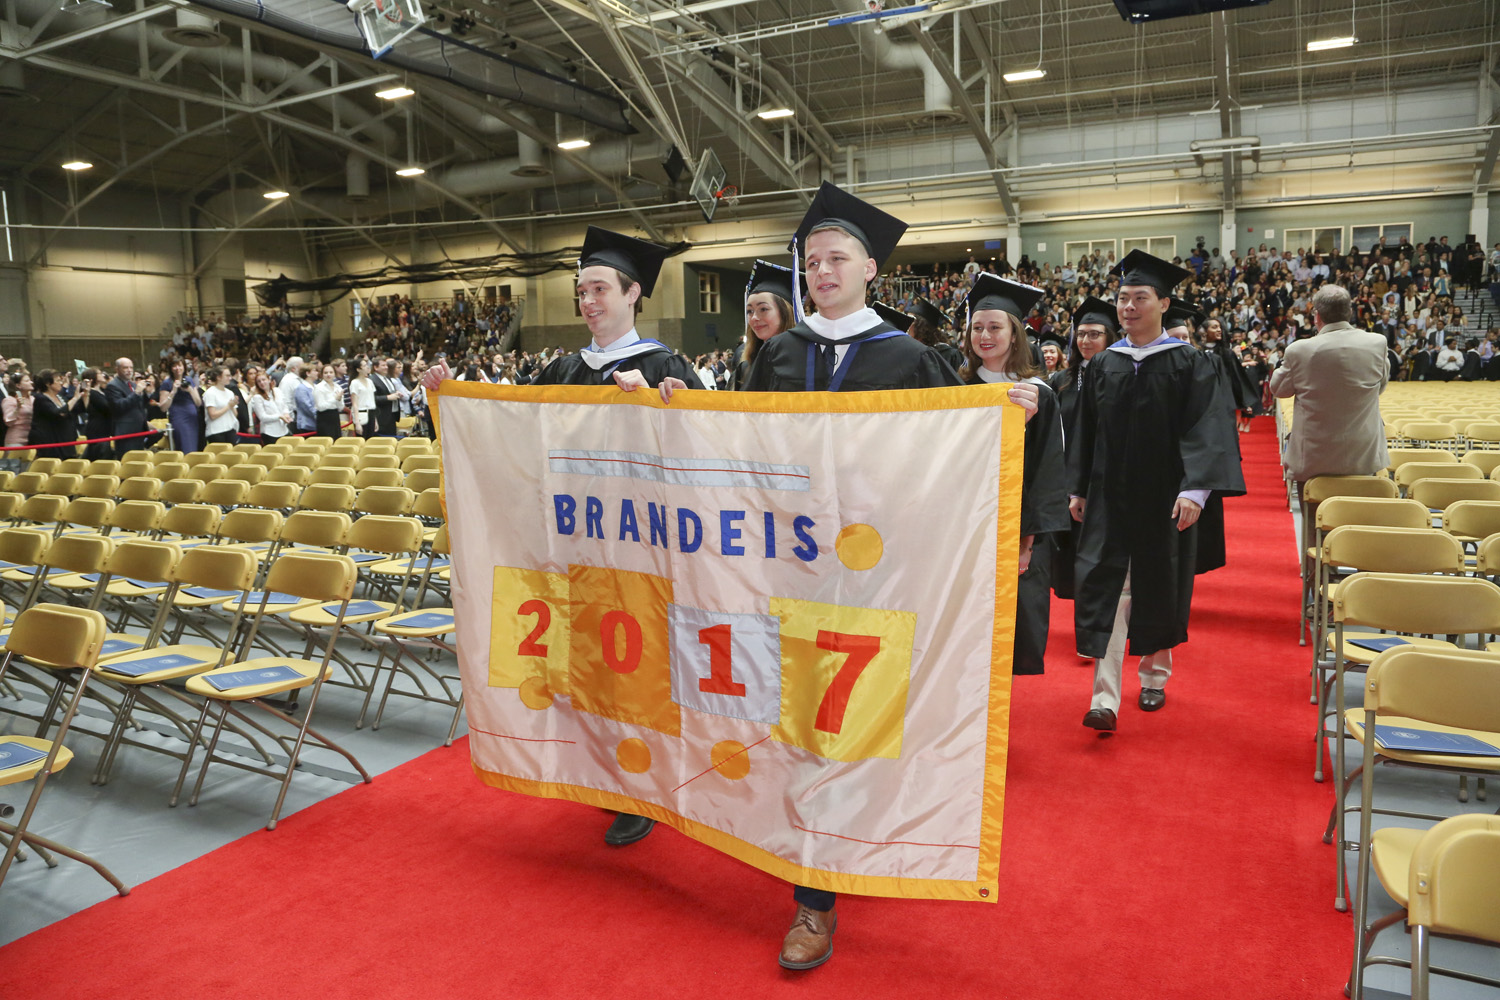 students in caps and gowns, holding a Brandeis 2017 banner, marching into Gosman Center for Commencement